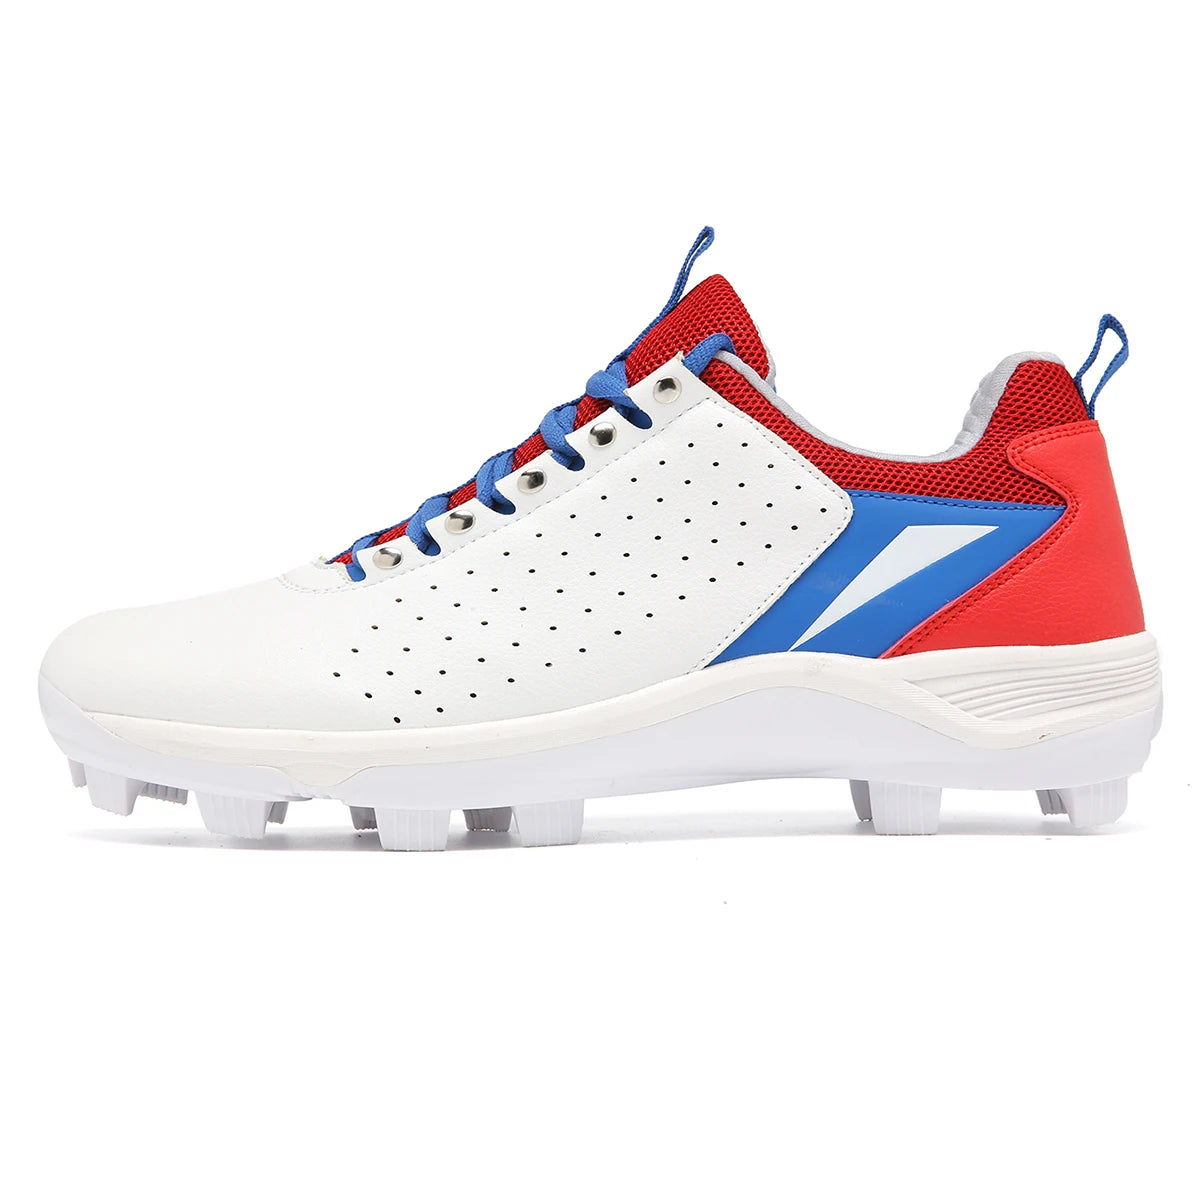 2024 Elite Men's Baseball Sneaker featuring breathable material, non-slip long spikes, and stylish design for superior athletic performance.